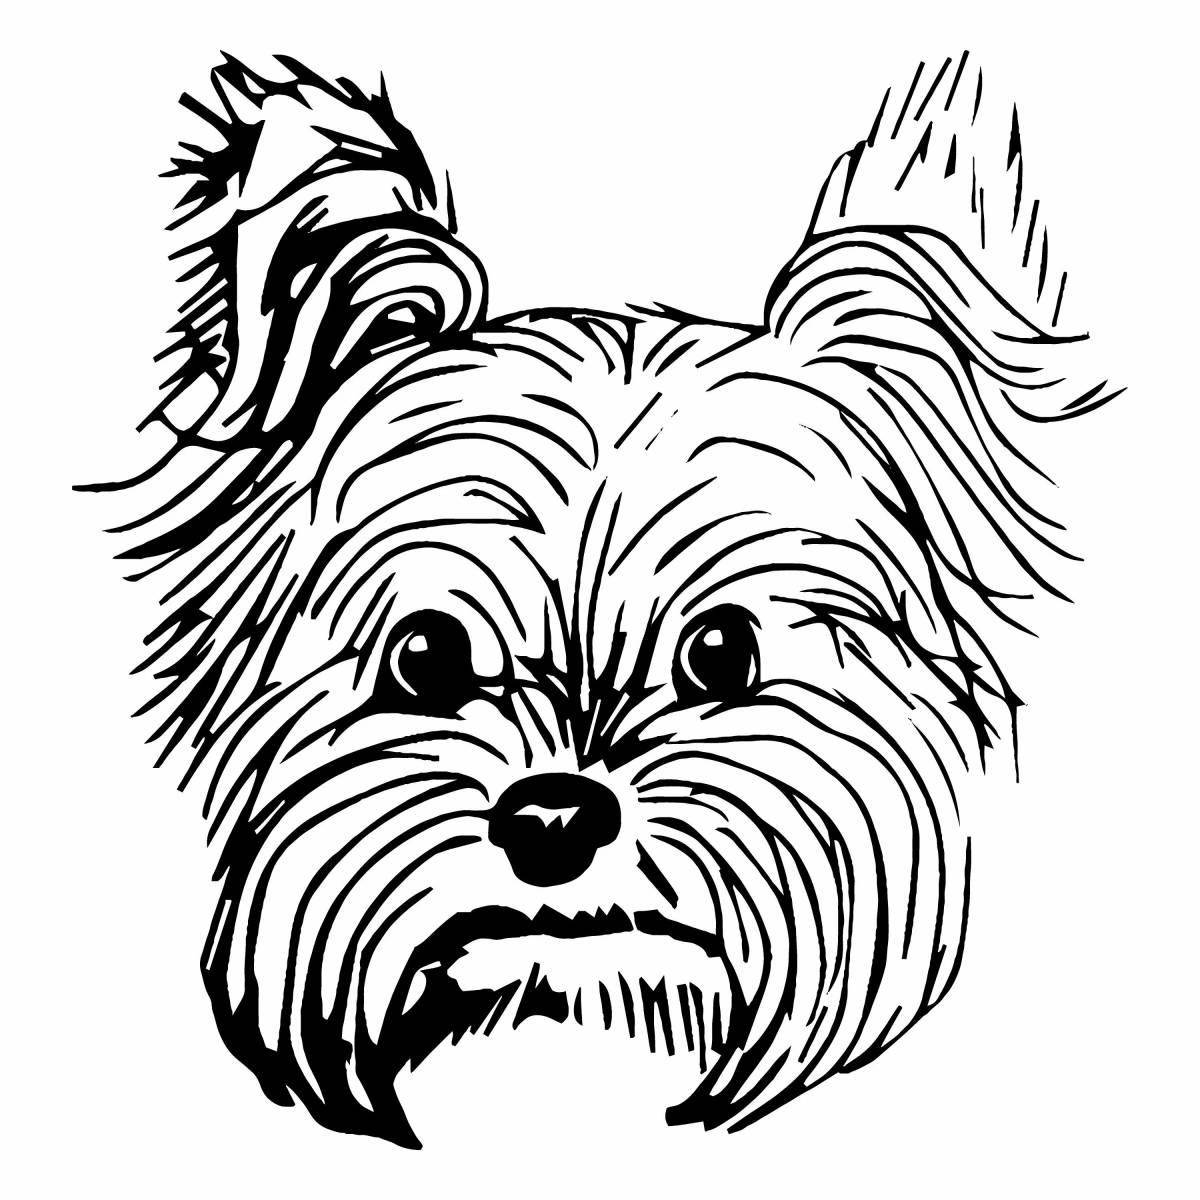 Colouring adorable yorkie